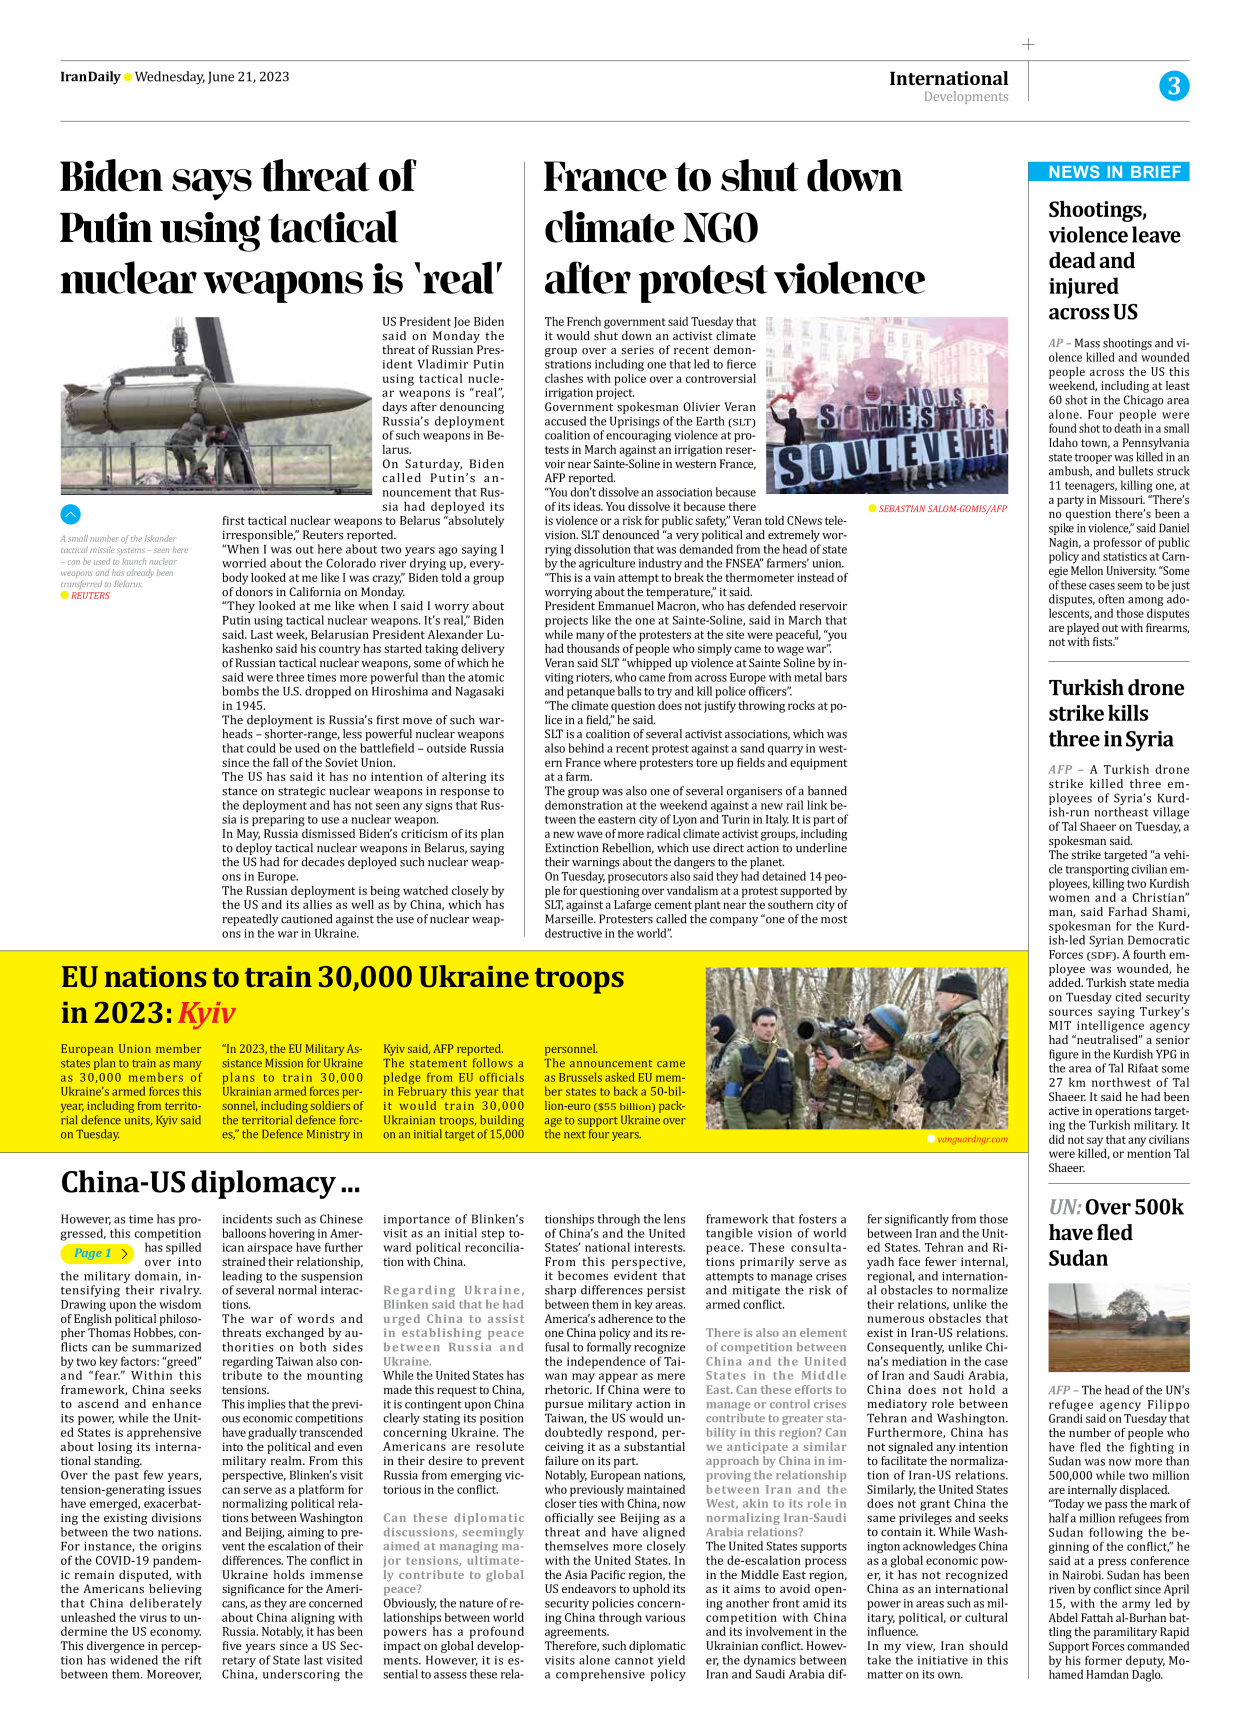 Iran Daily - Number Seven Thousand Three Hundred and Twenty - 21 June 2023 - Page 3